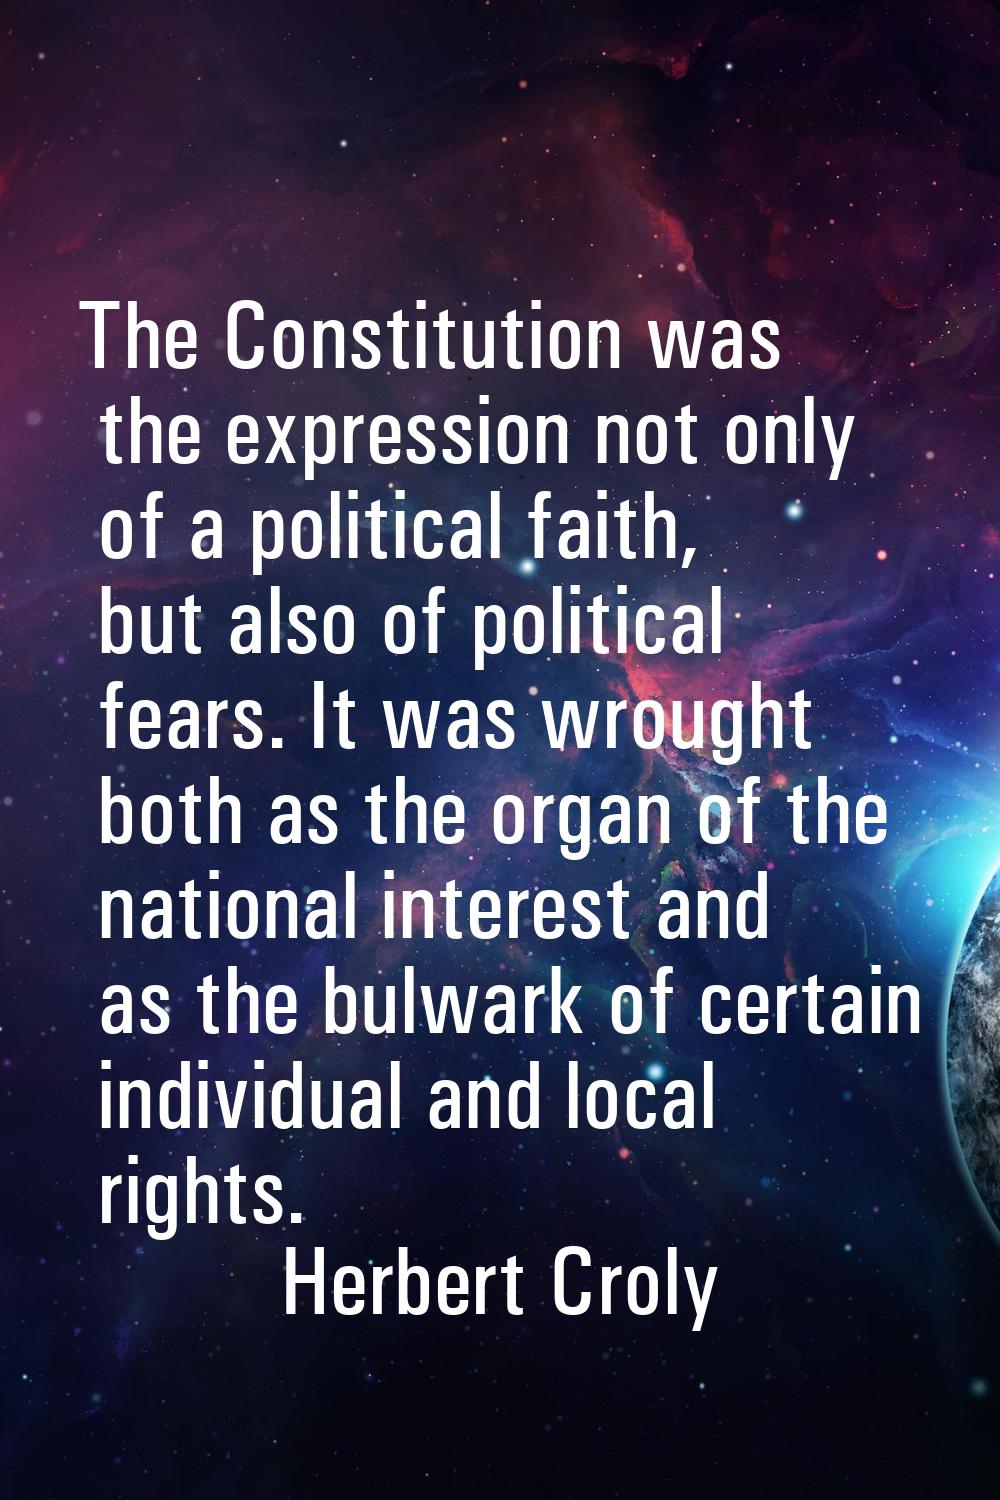 The Constitution was the expression not only of a political faith, but also of political fears. It 